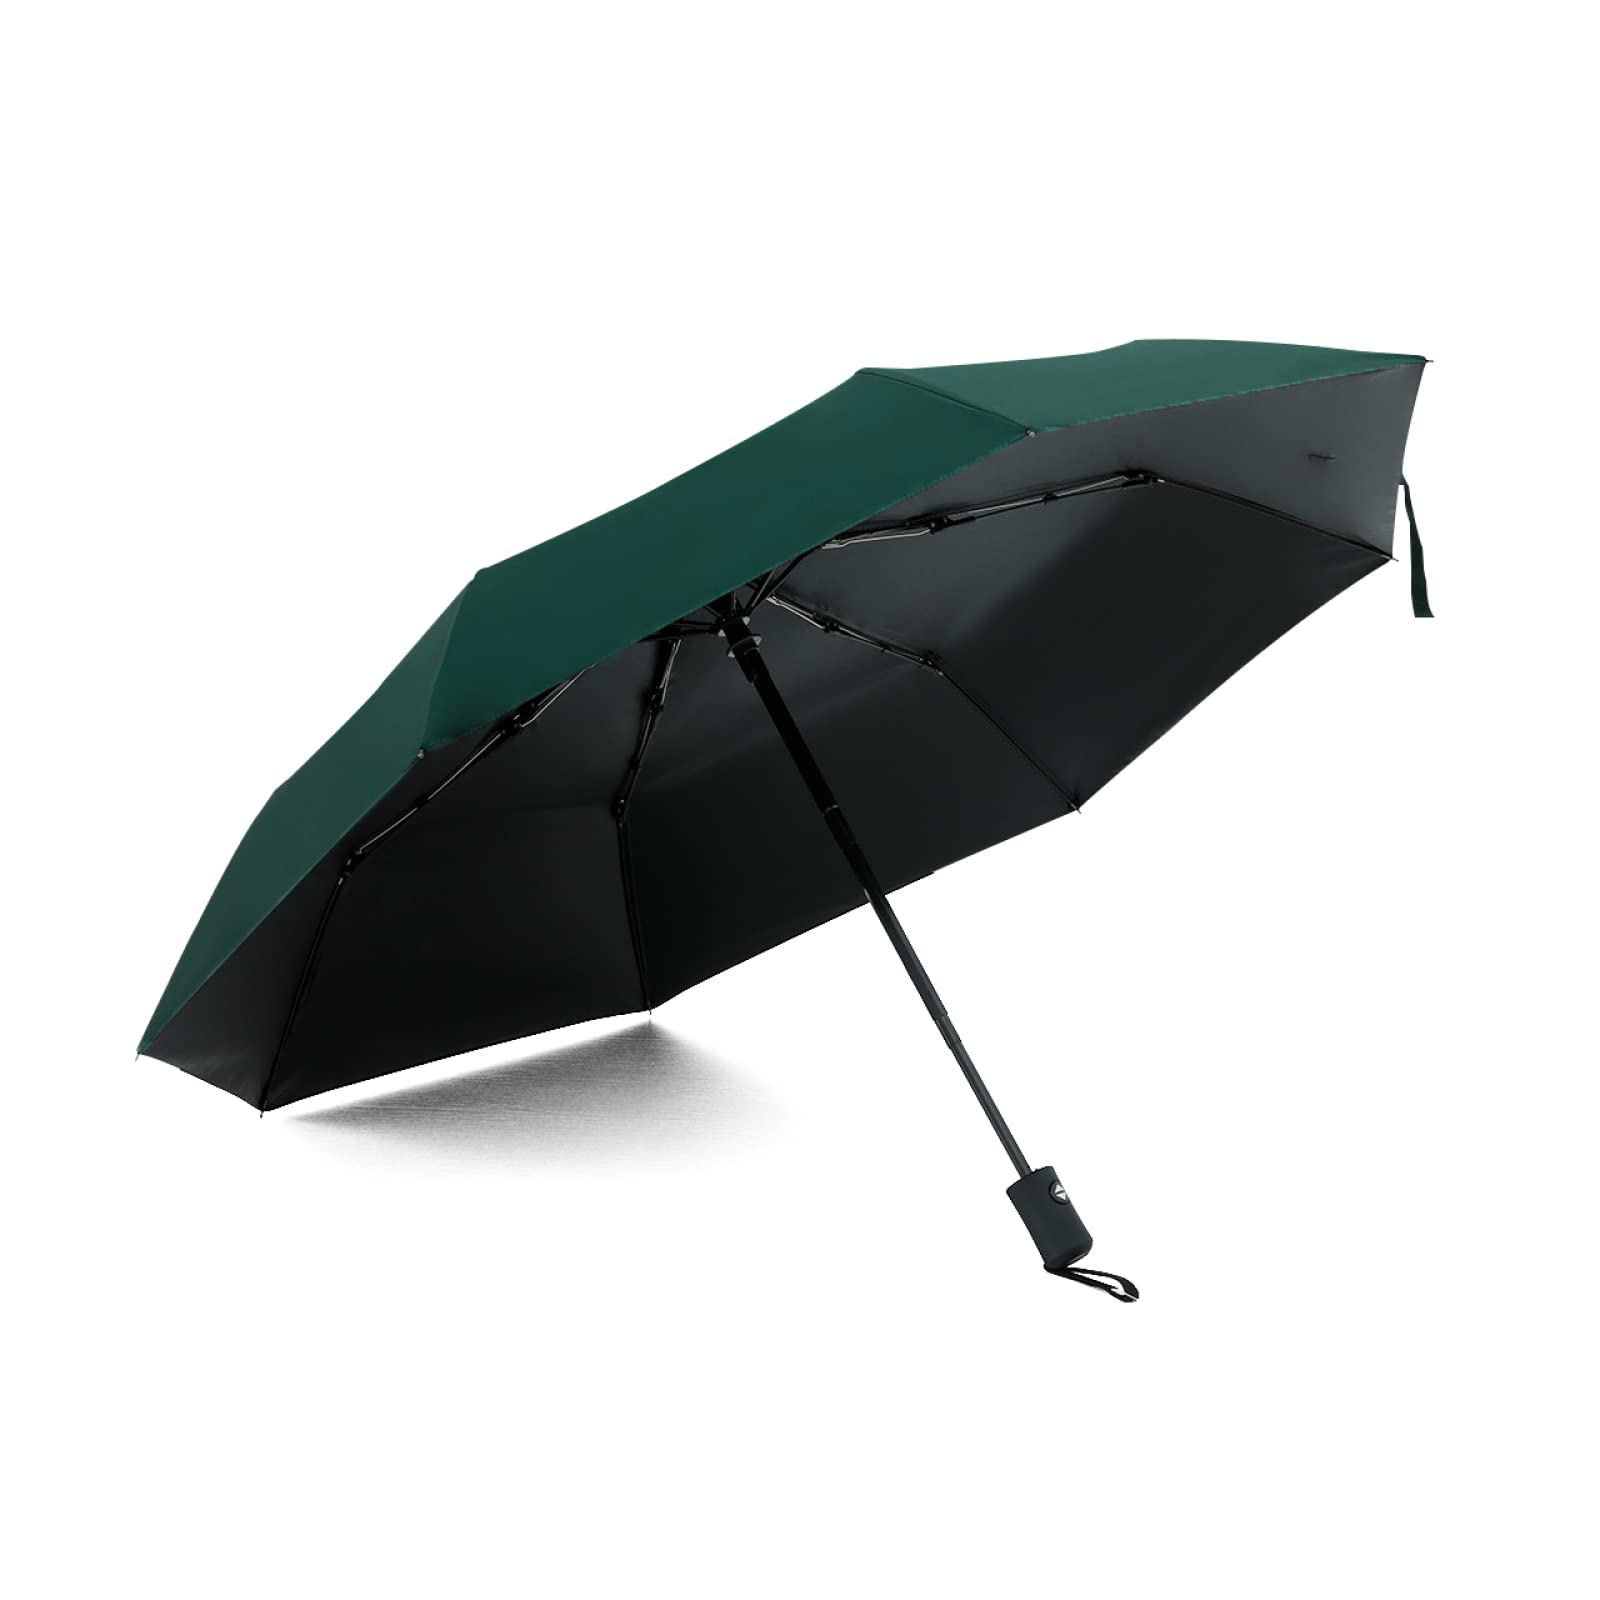 ABSORBIA Unisex 3 fold Umbrella for Rain & Sun Protection and also windproof | Double Layer Folding Portable Umbrella| Green colour | Fancy and Easy to Travel